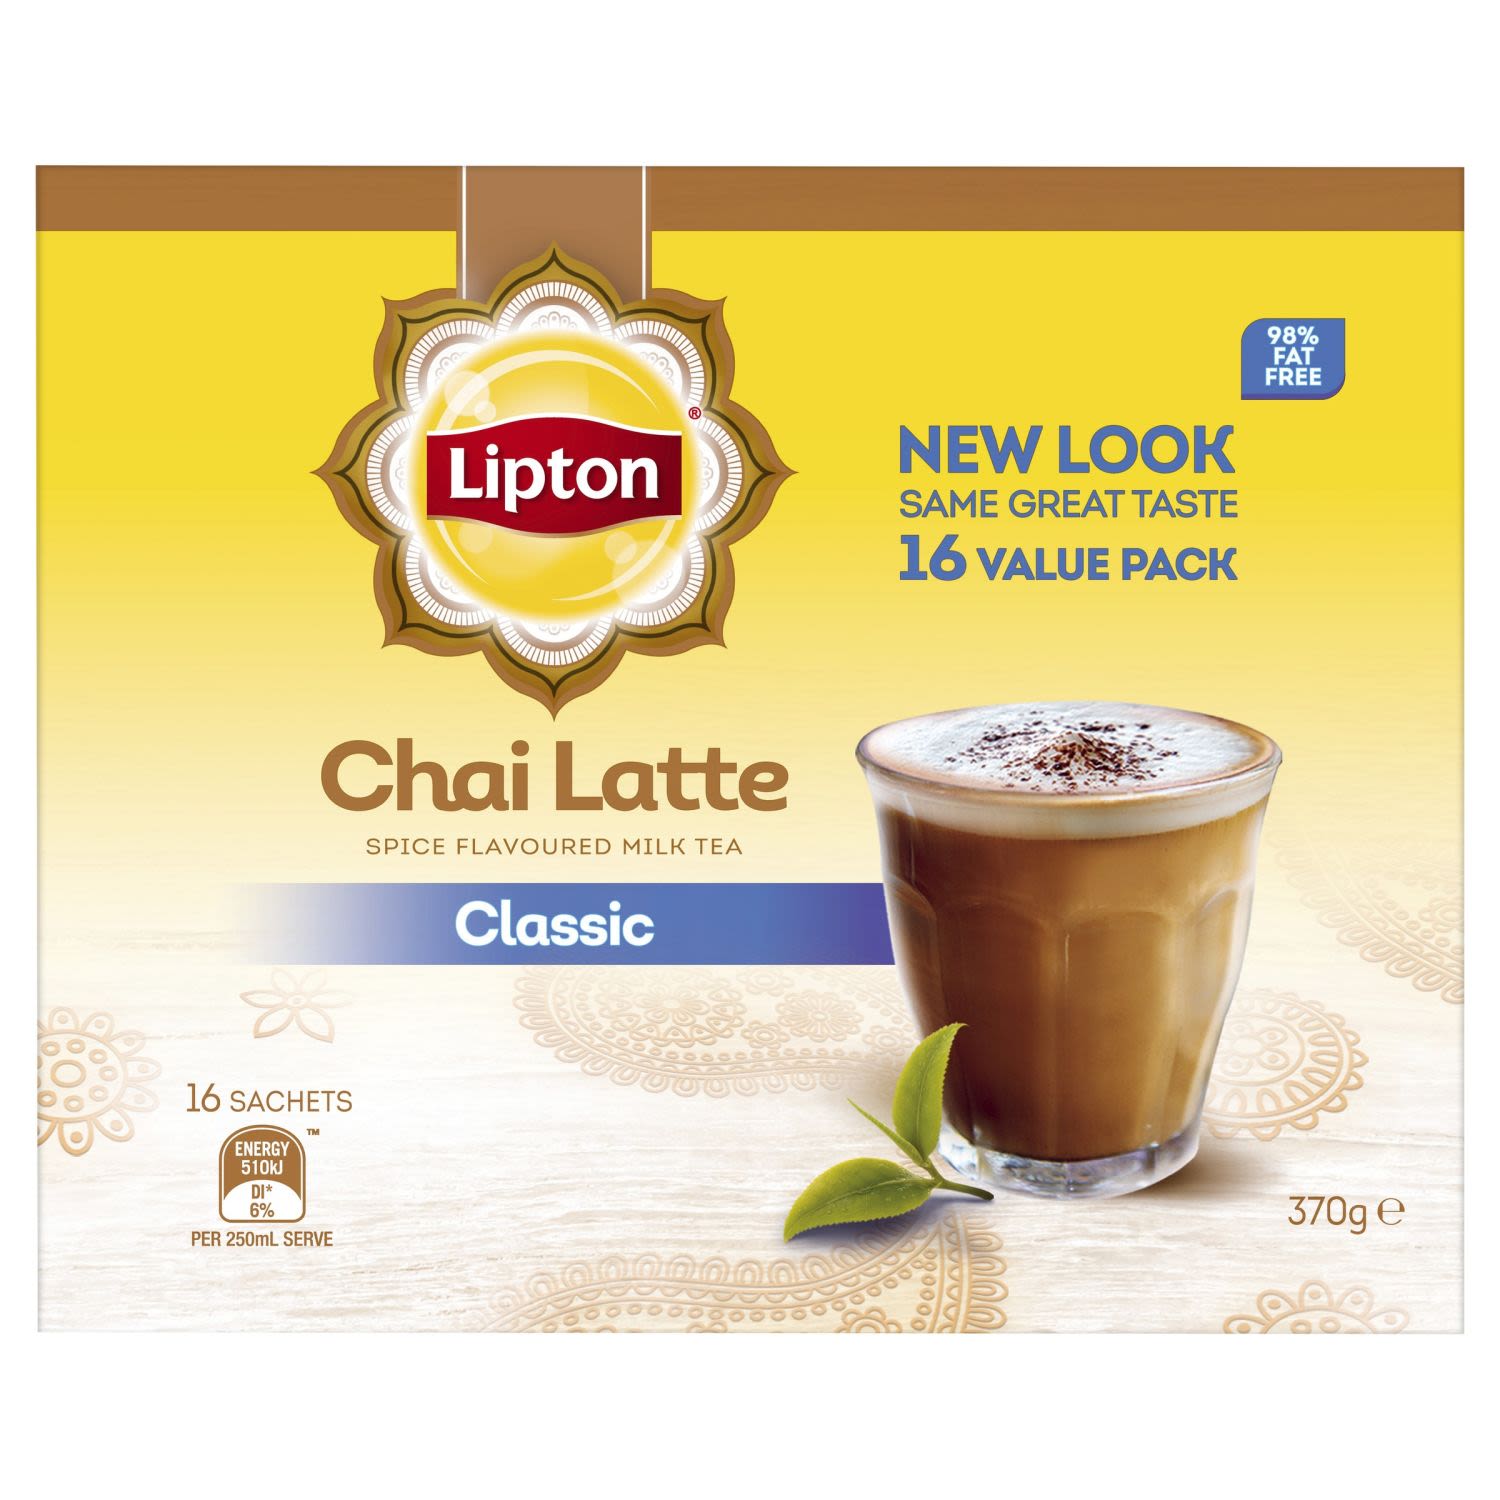 Lipton® Lipton Chai Latte Regular is a unique taste experience. It combines tea with exotic spice flavours such as cinnamon, cardamom and ginger with a delicious, creamy milk base. Just add hot water to enjoy a frothy latte style pick-me-up. Lipton Chai Latte is also 98% Fat Free. A refreshing taste for a feed good moment. At Lipton we recognise the importance of sustainability in the growth of our tea. With over 100 years of experience our approach to sustainability is holistic. We looked in detail at the social, environmental and economic aspects of tea production carrying out our own work and working with Rainforest Alliance to ensure all our tea is sourced sustainably. Now, all our tea blends are made with 100% natural, Rainforest Alliance™ certified tea leaves. Tea was originally an expensive drink, enjoyed exclusively by the wealthy. Thomas Lipton was a man on a mission – to share his passion for tea around the world. He believed that everyone deserved high quality, great tasting tea. And over 120 years later, that belief is still what drives us – inspiring more flavours, more varieties and more love than ever before. All our tea bags are 100% sustainably sourced, which translates into ensuring decent wages for tea farmers around the world together with access to quality housing, education and medical care. Your tea is their brighter future.<br /> <br />